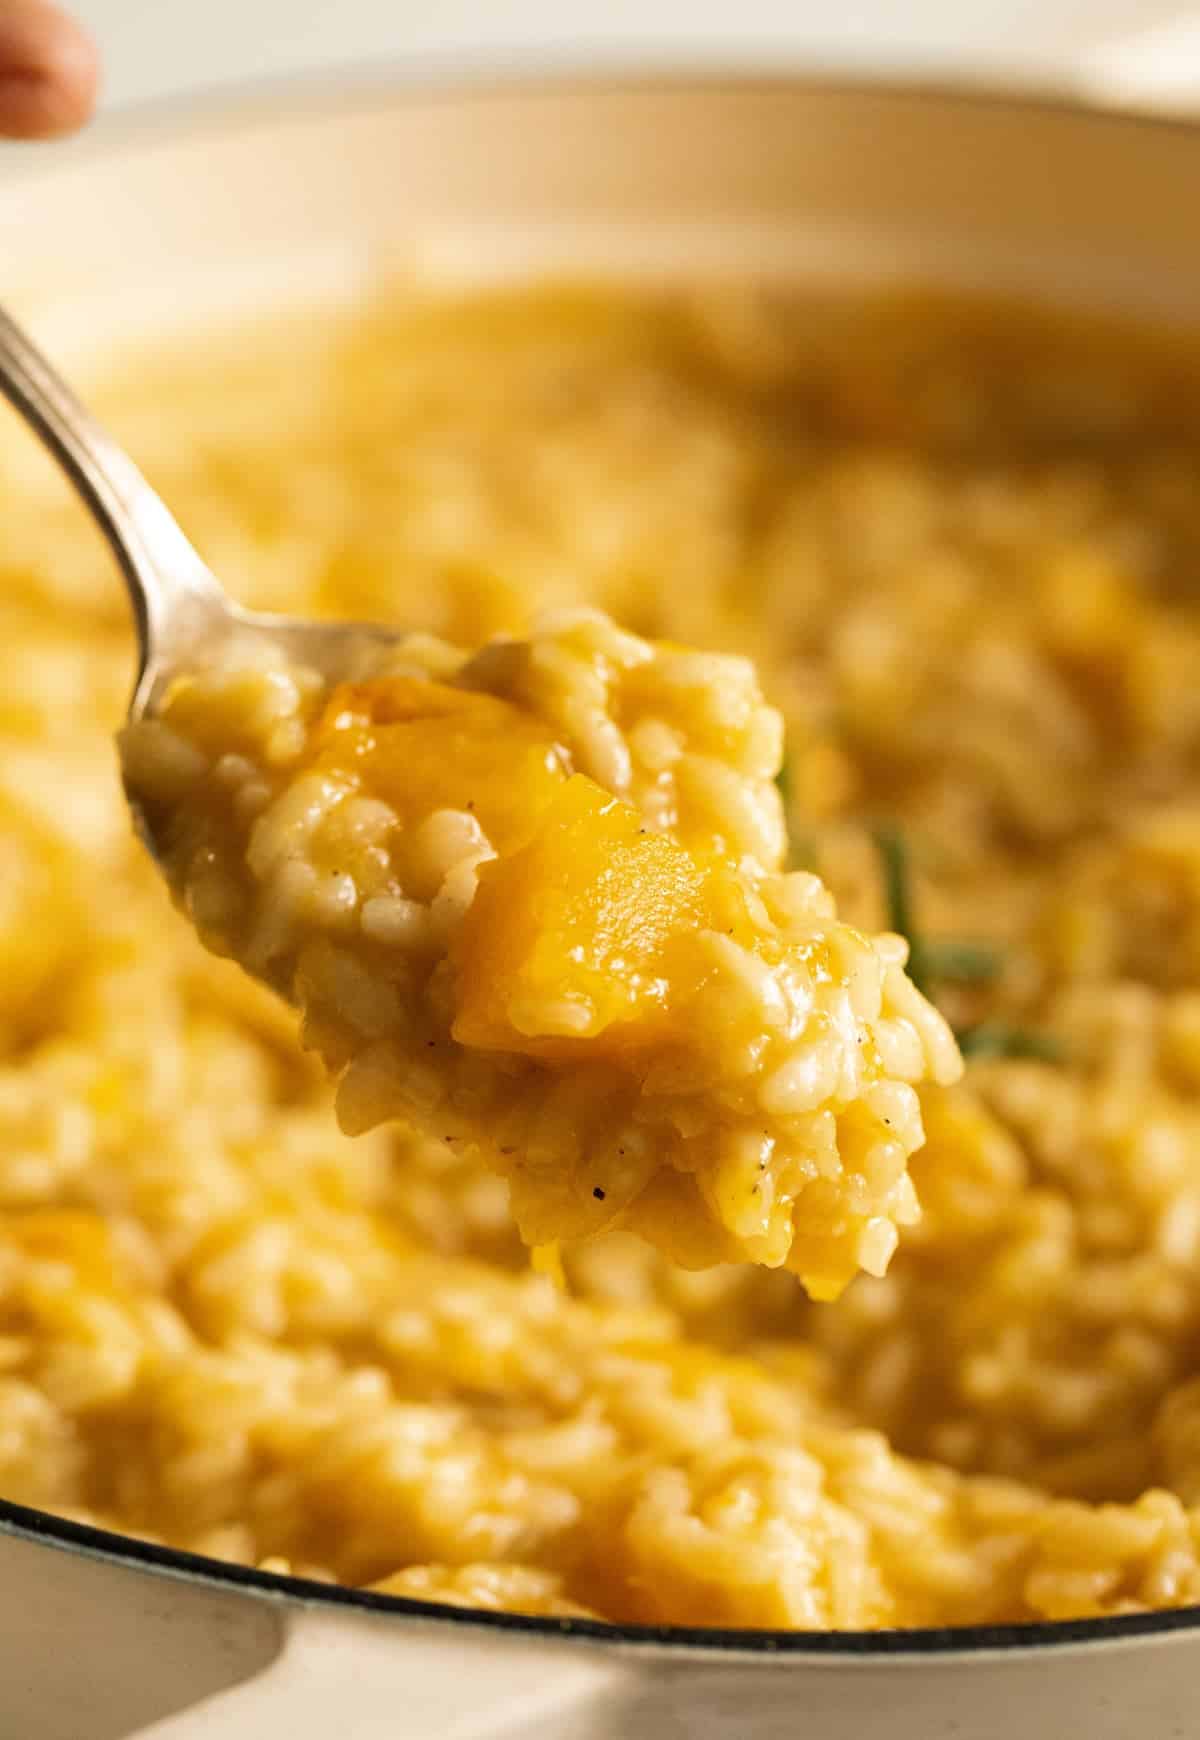 spoon lifting risotto with pieces of pumpkin in it.